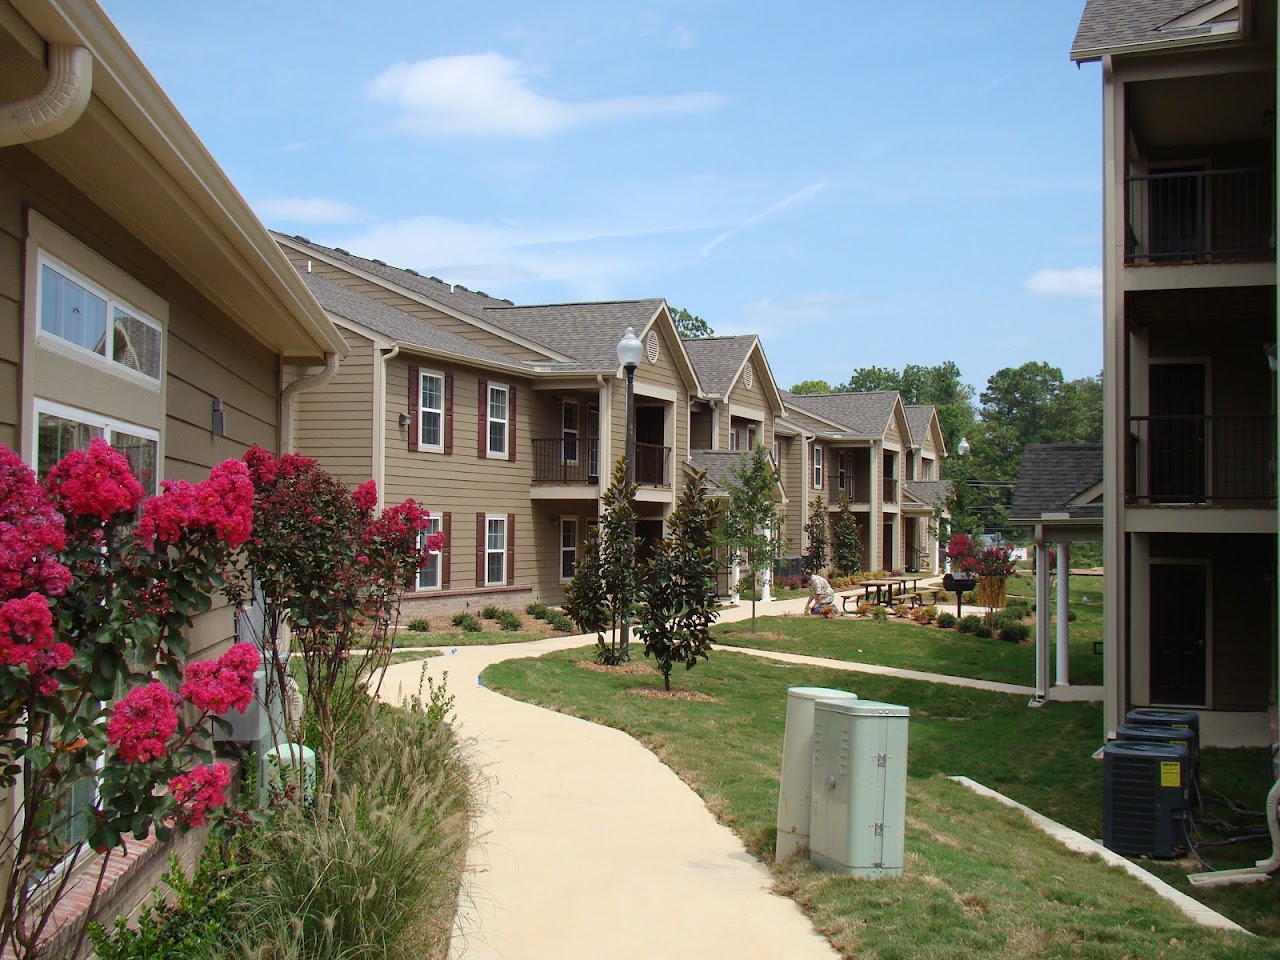 Photo of SPRING LAKE APTS. Affordable housing located at 1525 SPRING PL RD SE CLEVELAND, TN 37311